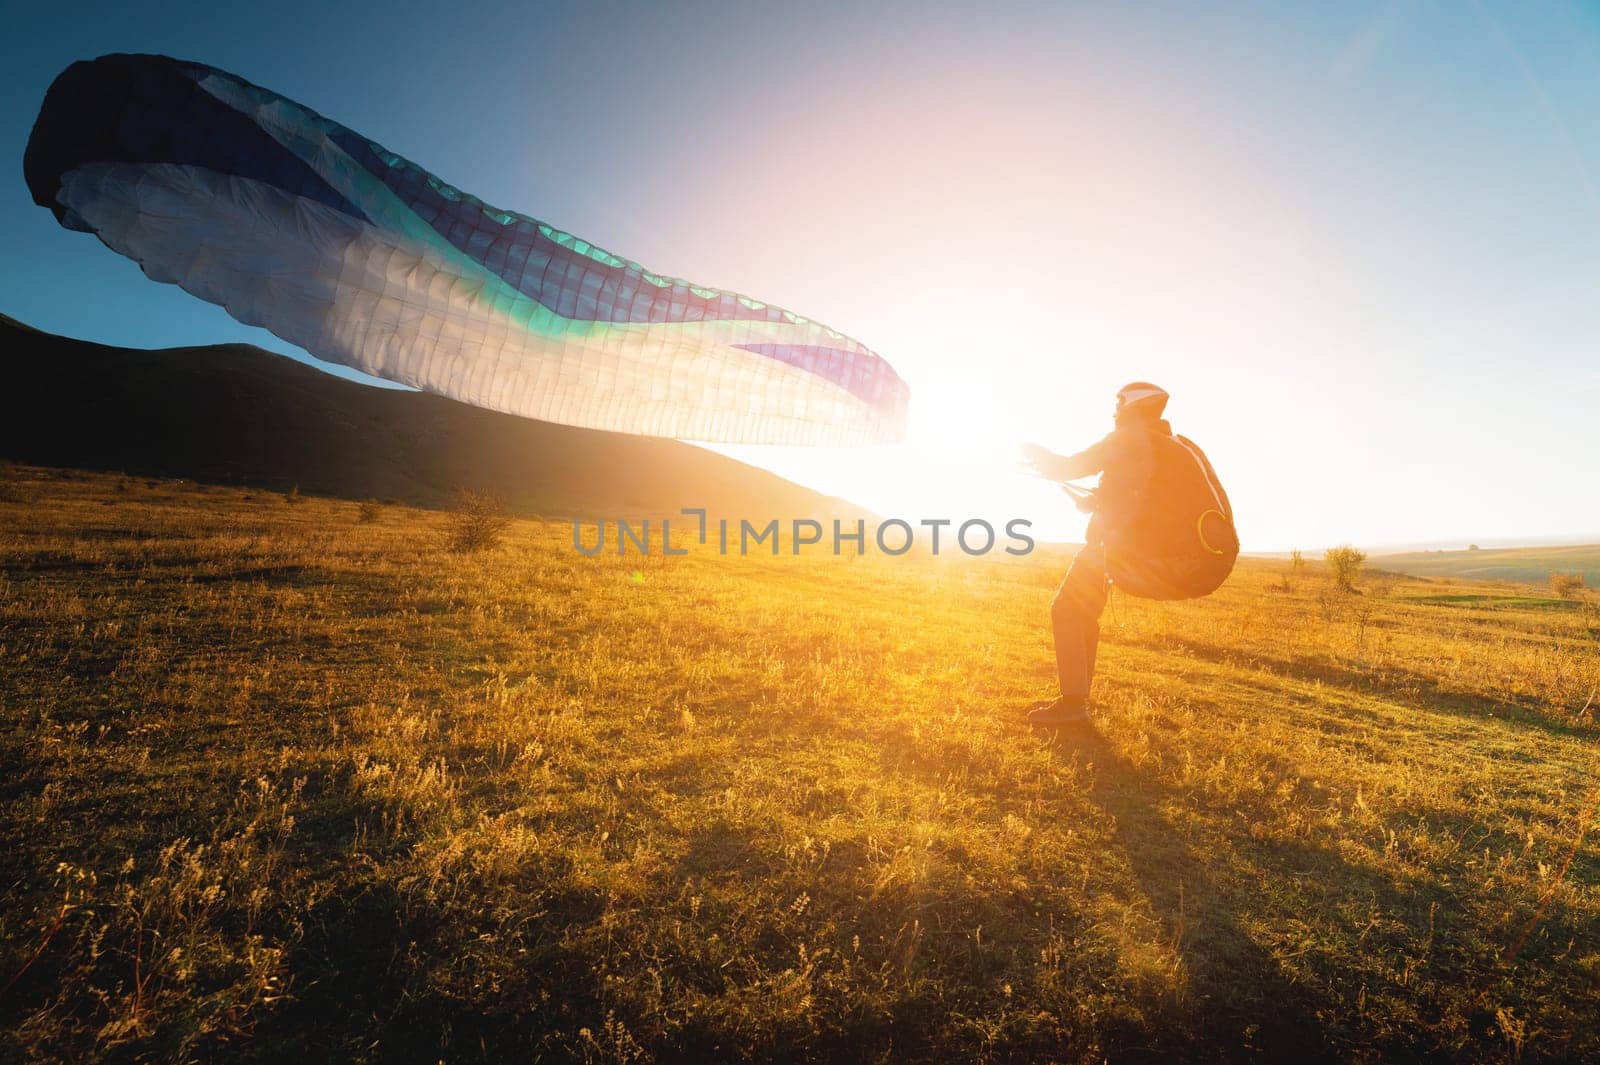 A paraglider with a blue parachute takes off. A male athlete stands on the field and lifts a paraglider into the air.